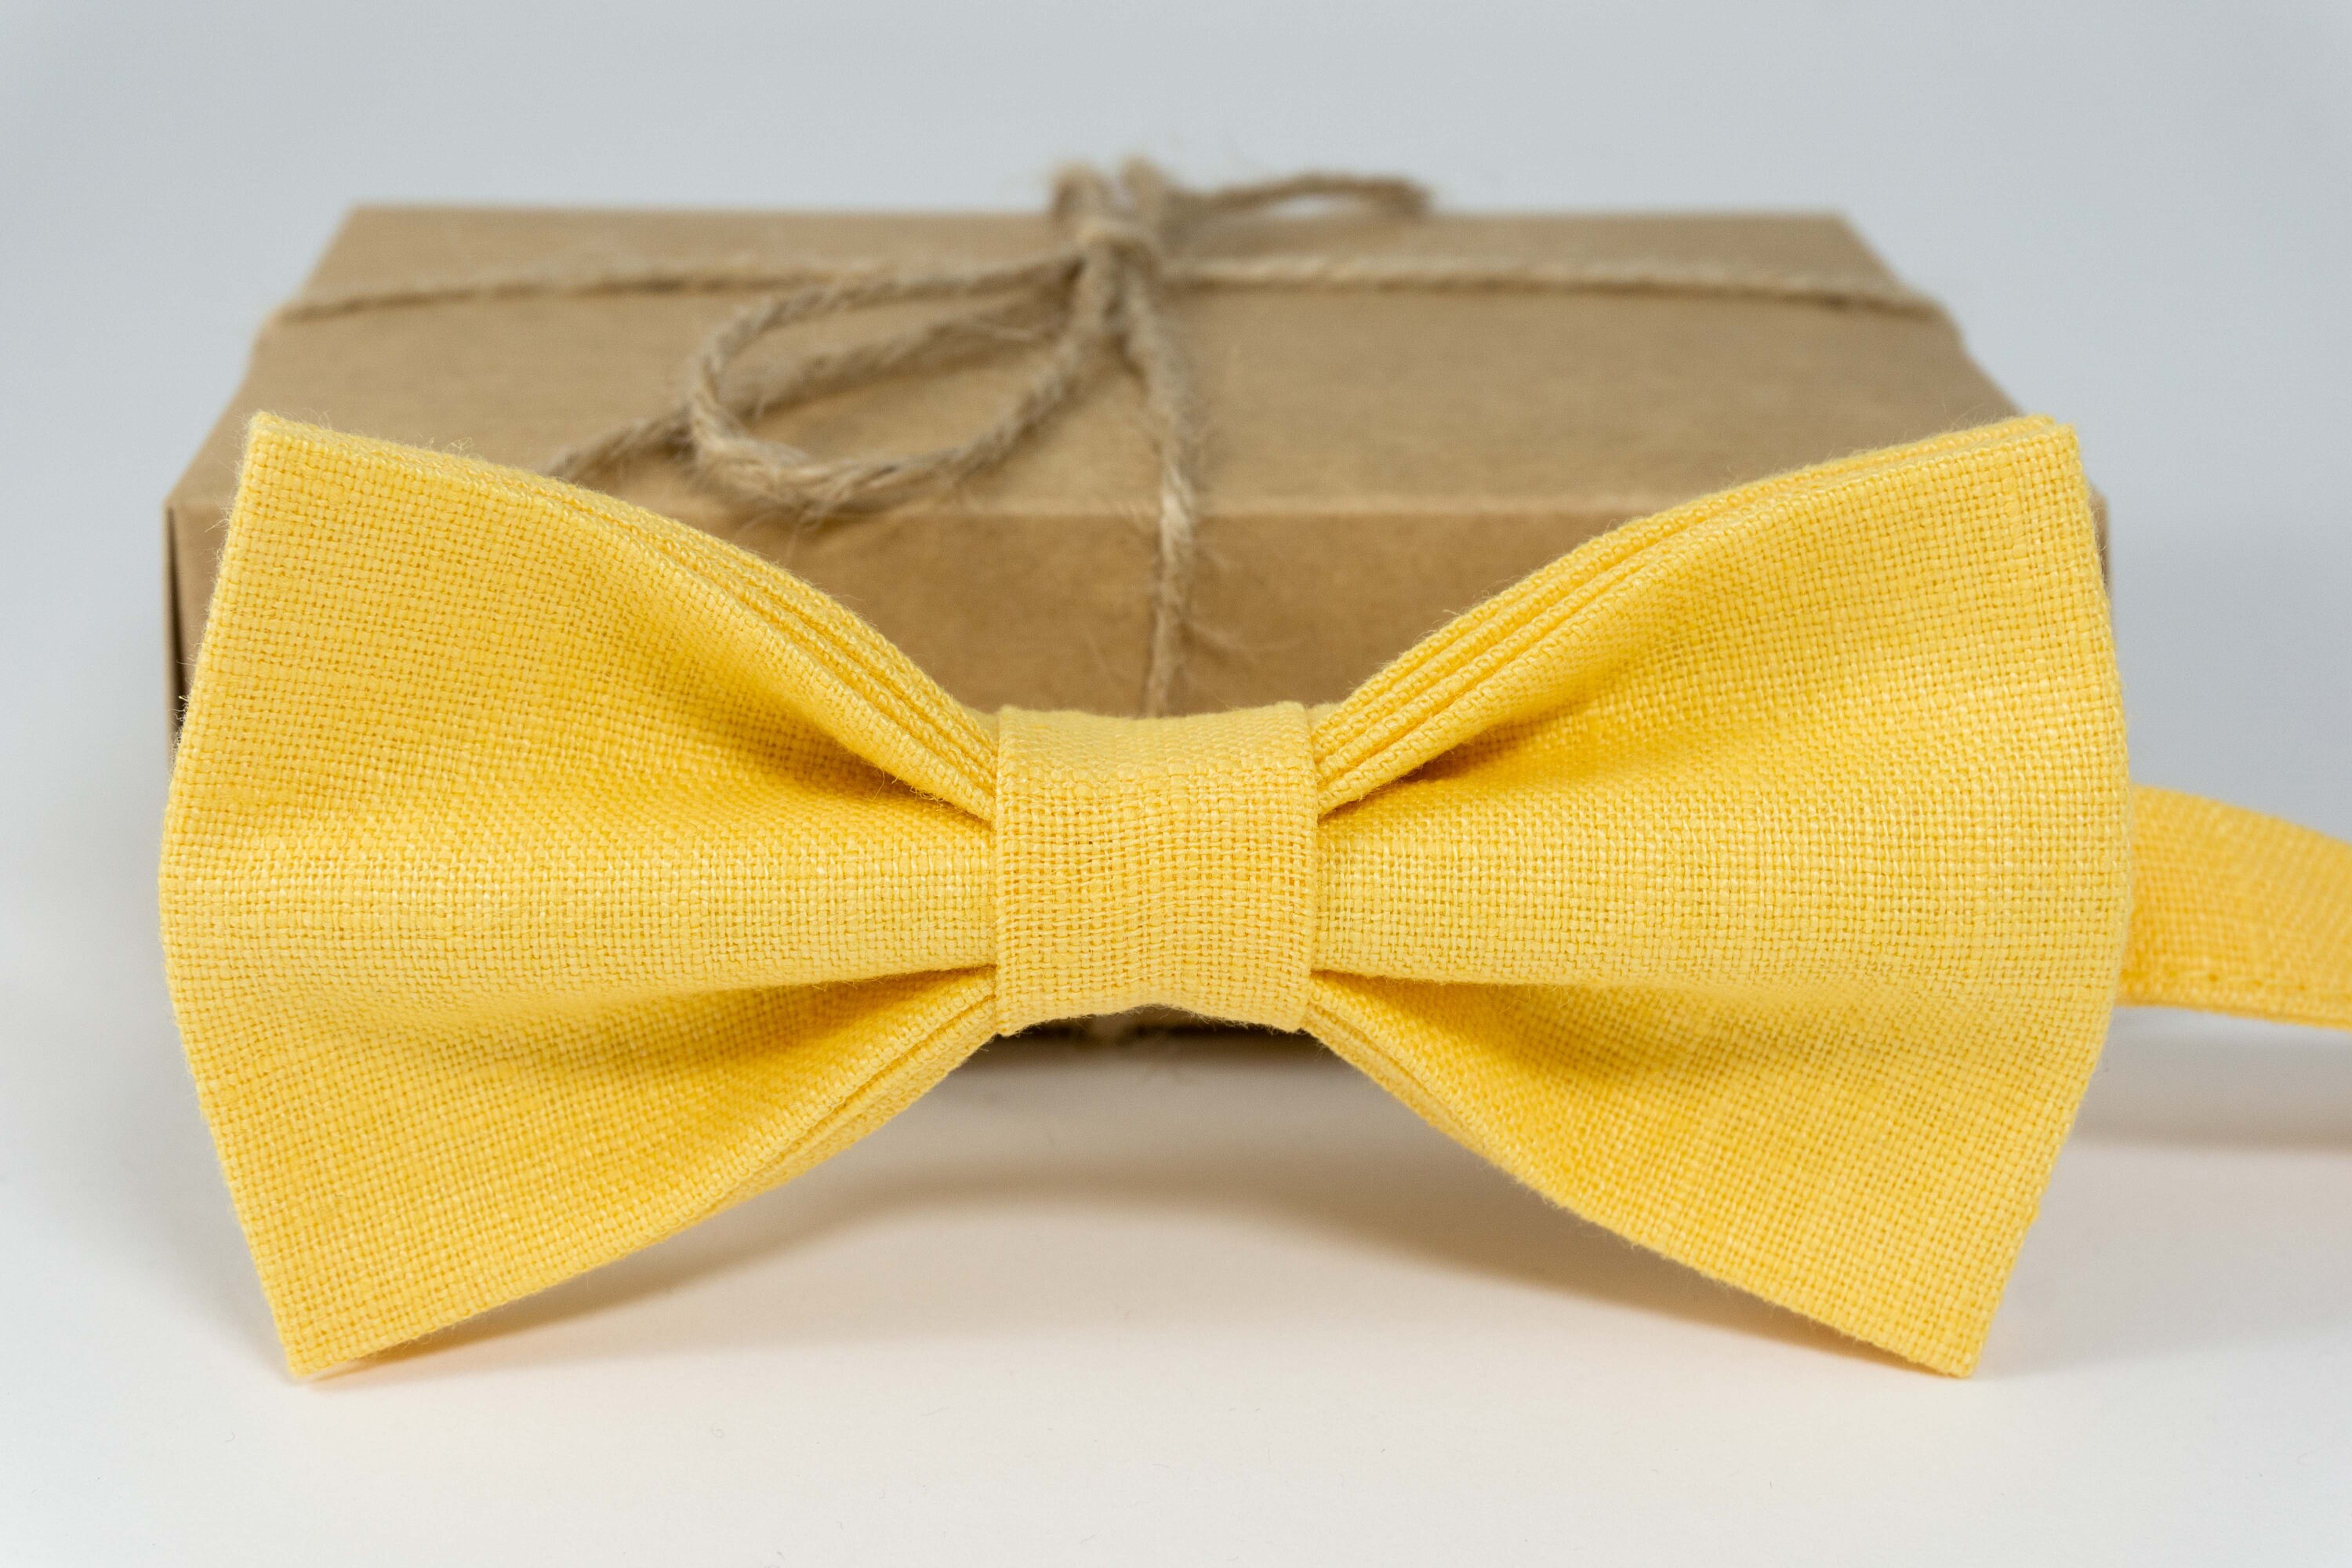 Yellow plain bow tie / Yellow color wedding bow tie / Yellow | Etsy